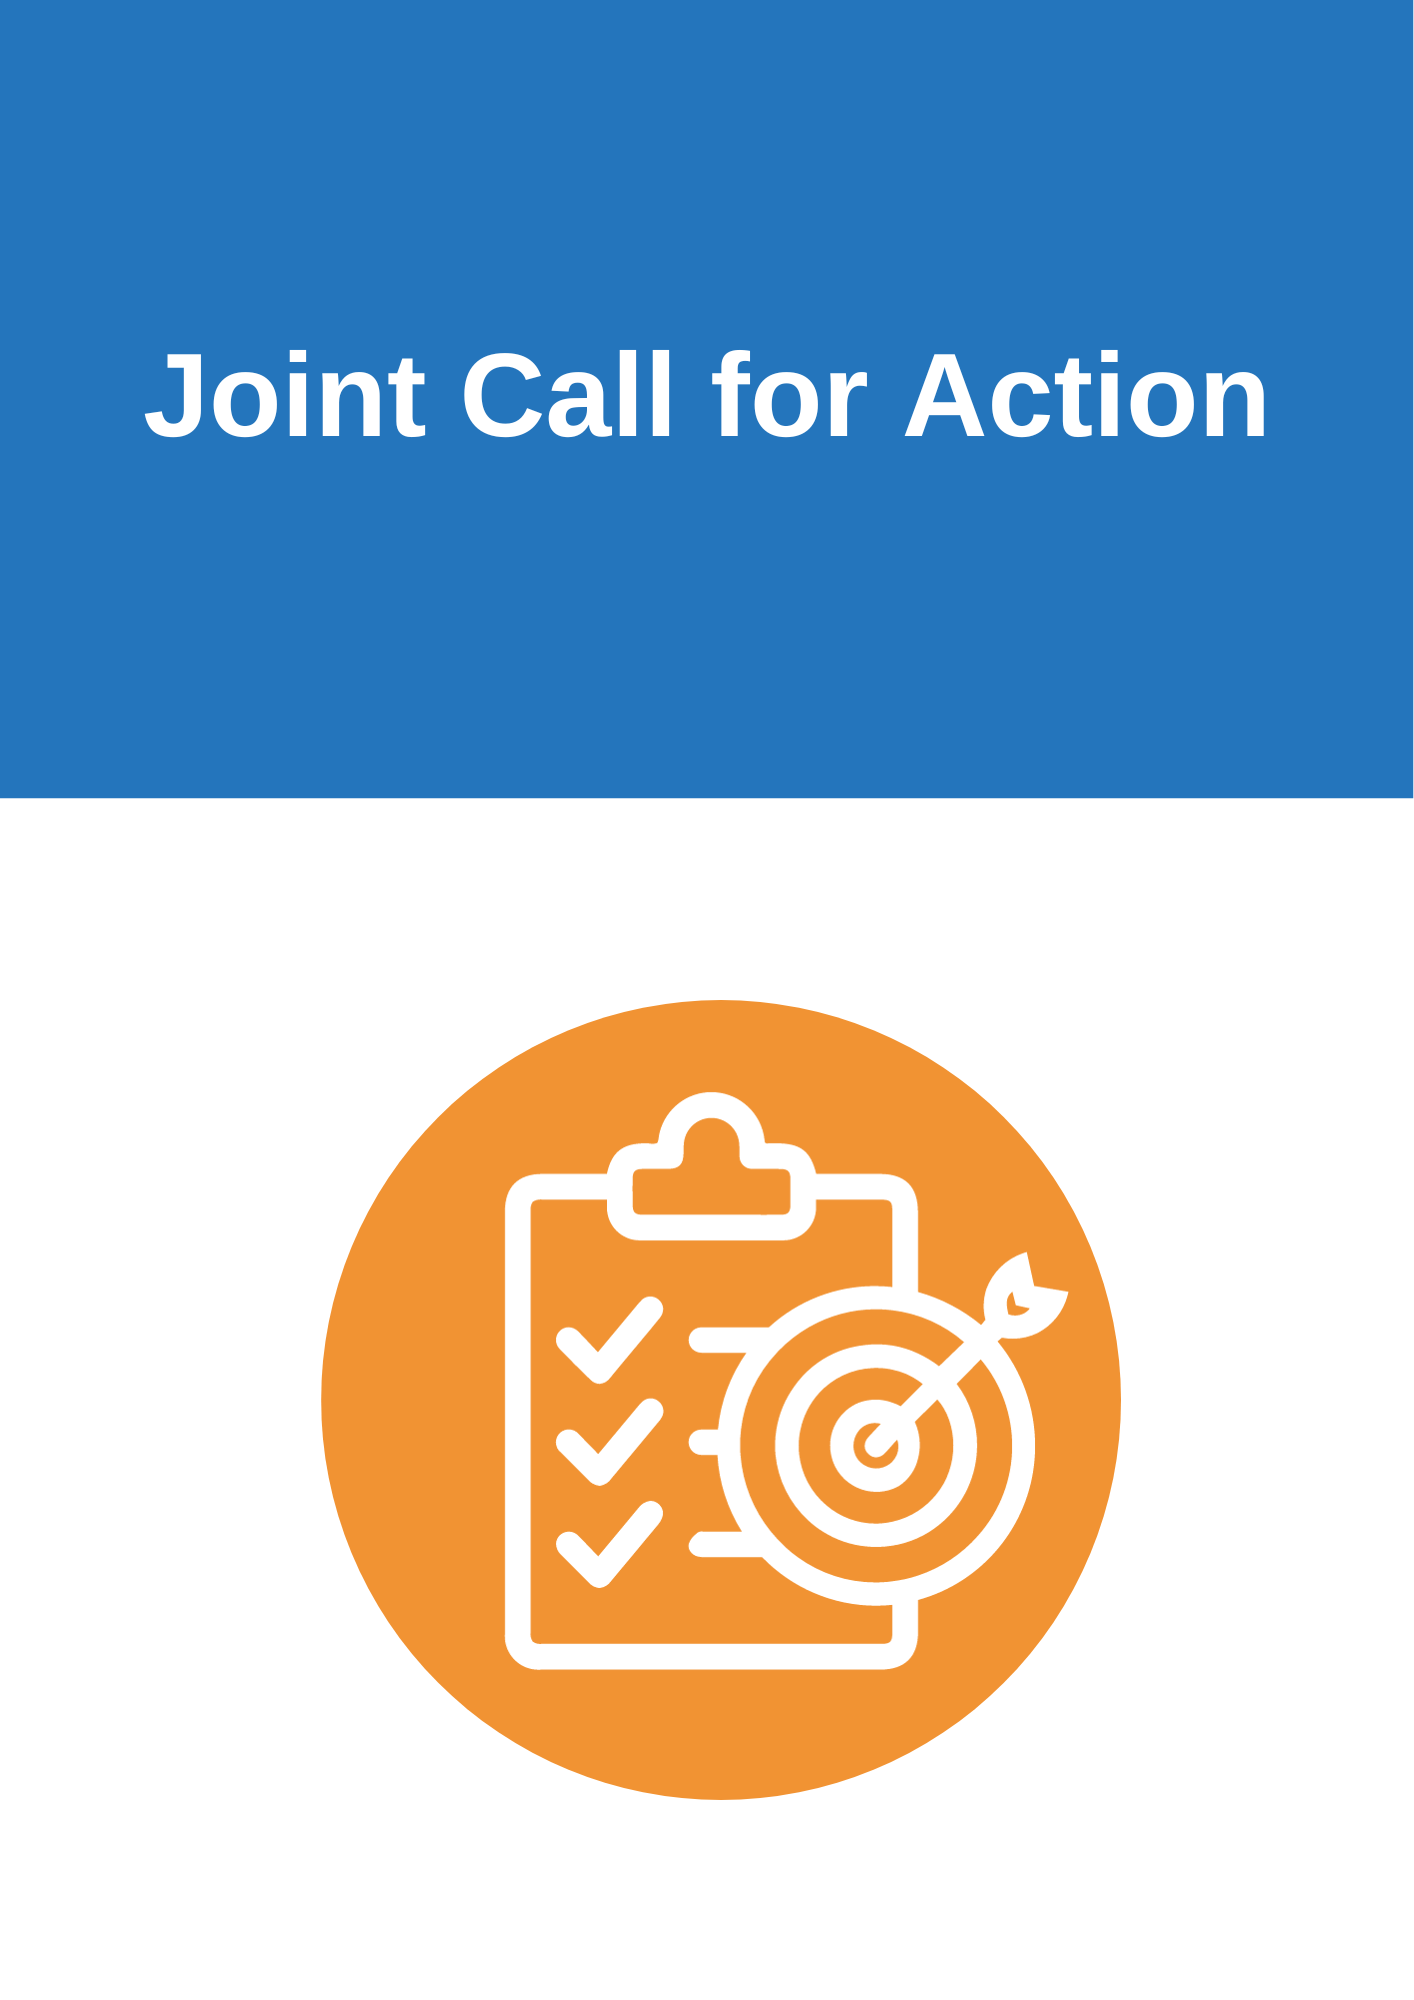 Joint call for action